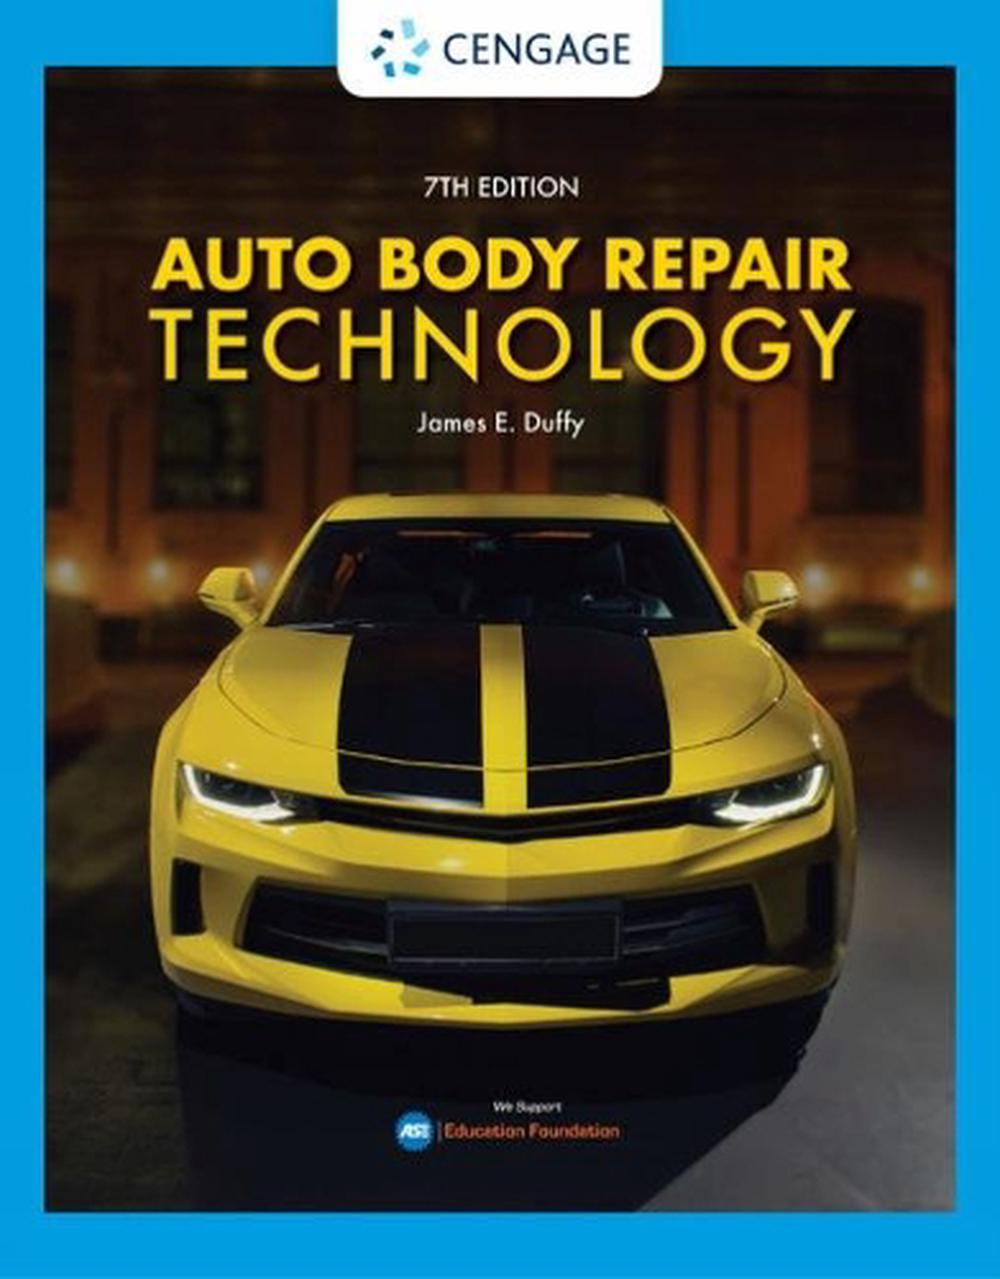 Auto Body Repair Technology by James Duffy (English) Hardcover Book